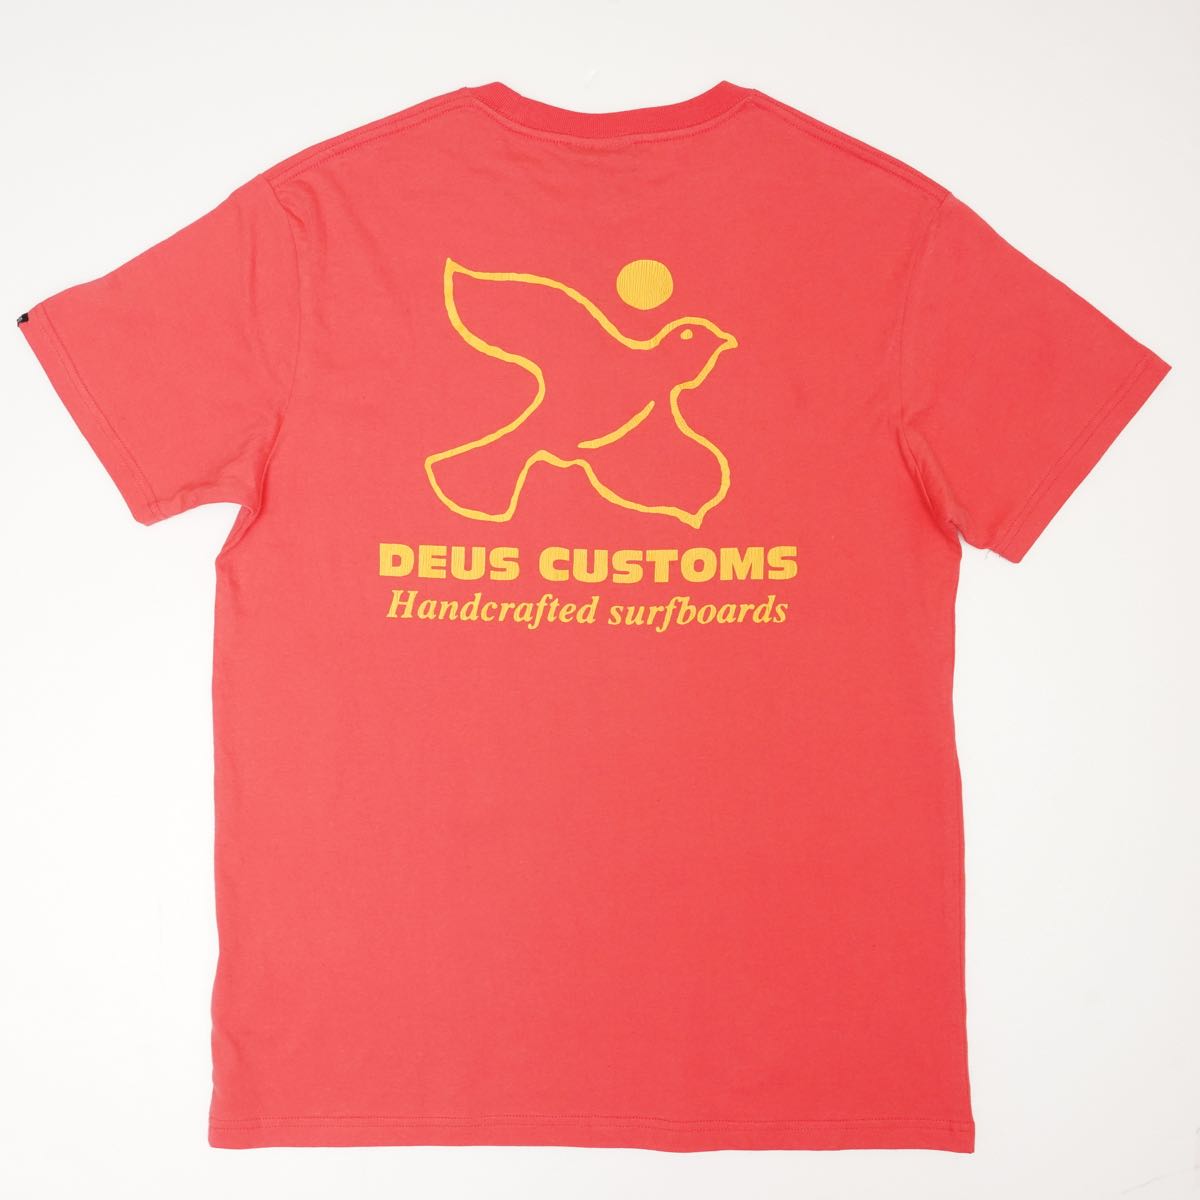 DEUS EX MACHINA デウスエクスマキナ レッドローズ CRAFTED TEE プリントTシャツ RED ROSE CRAFTED TEE